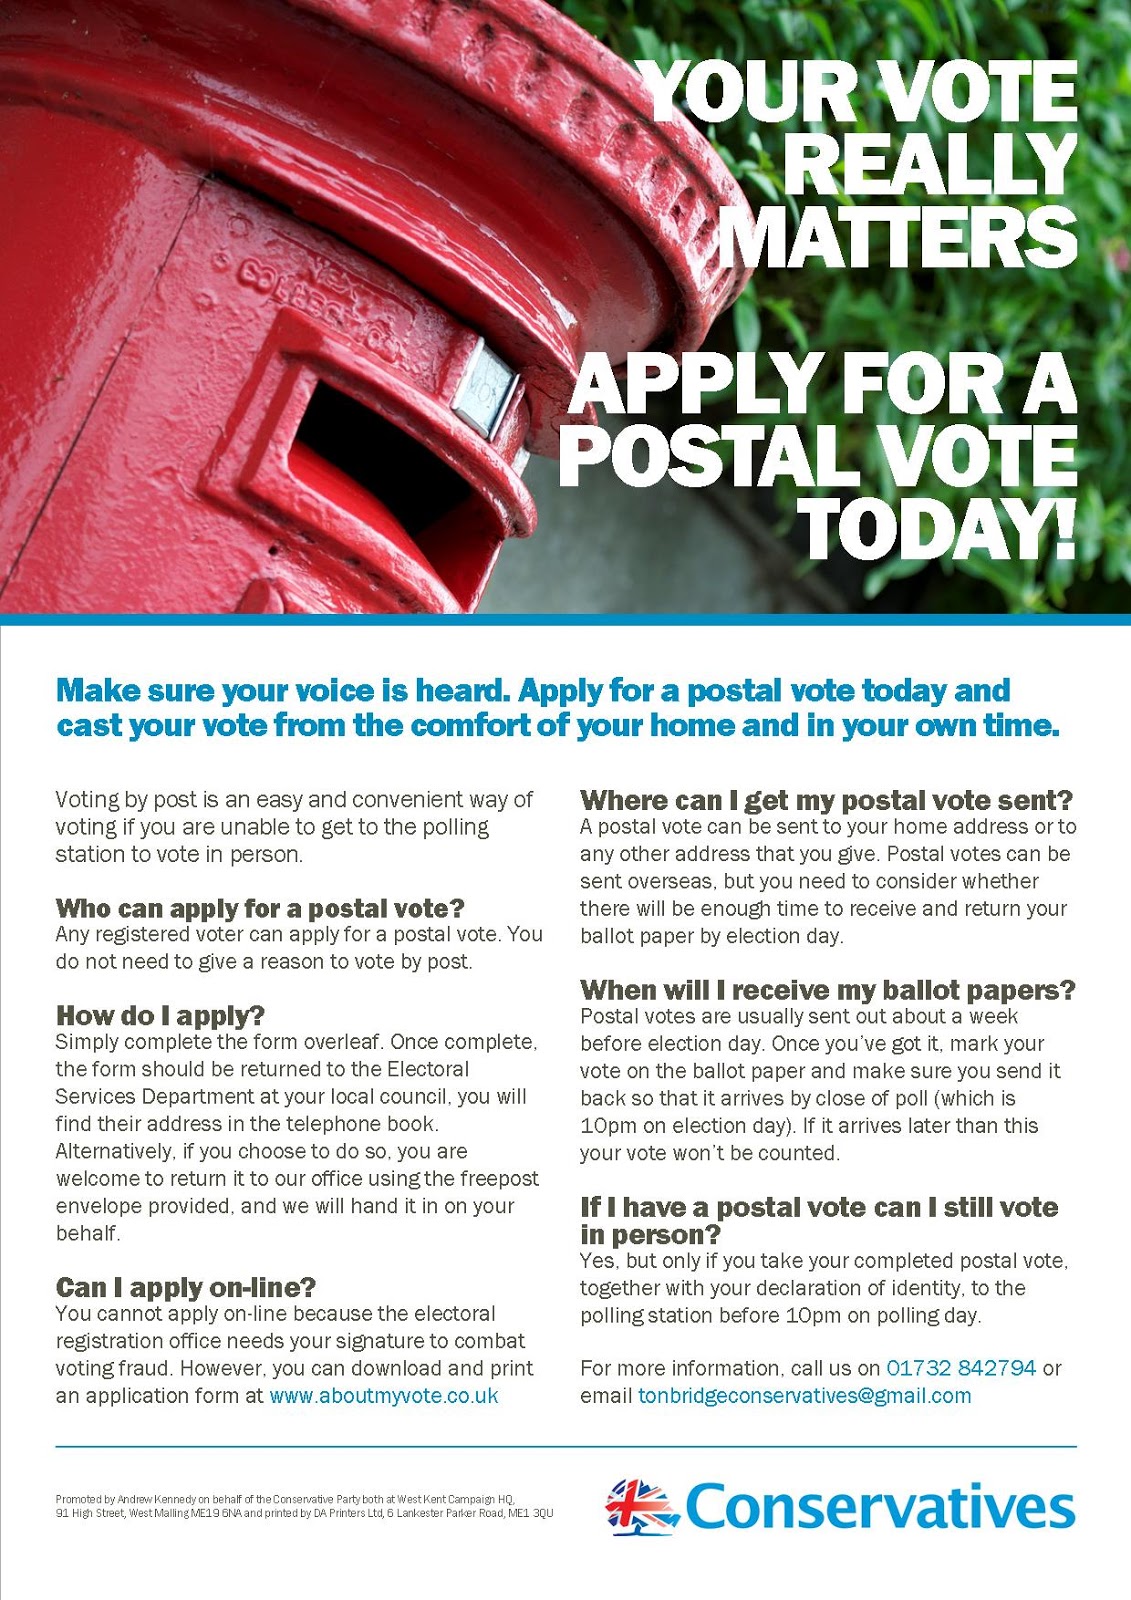 When can i apply for a postal vote